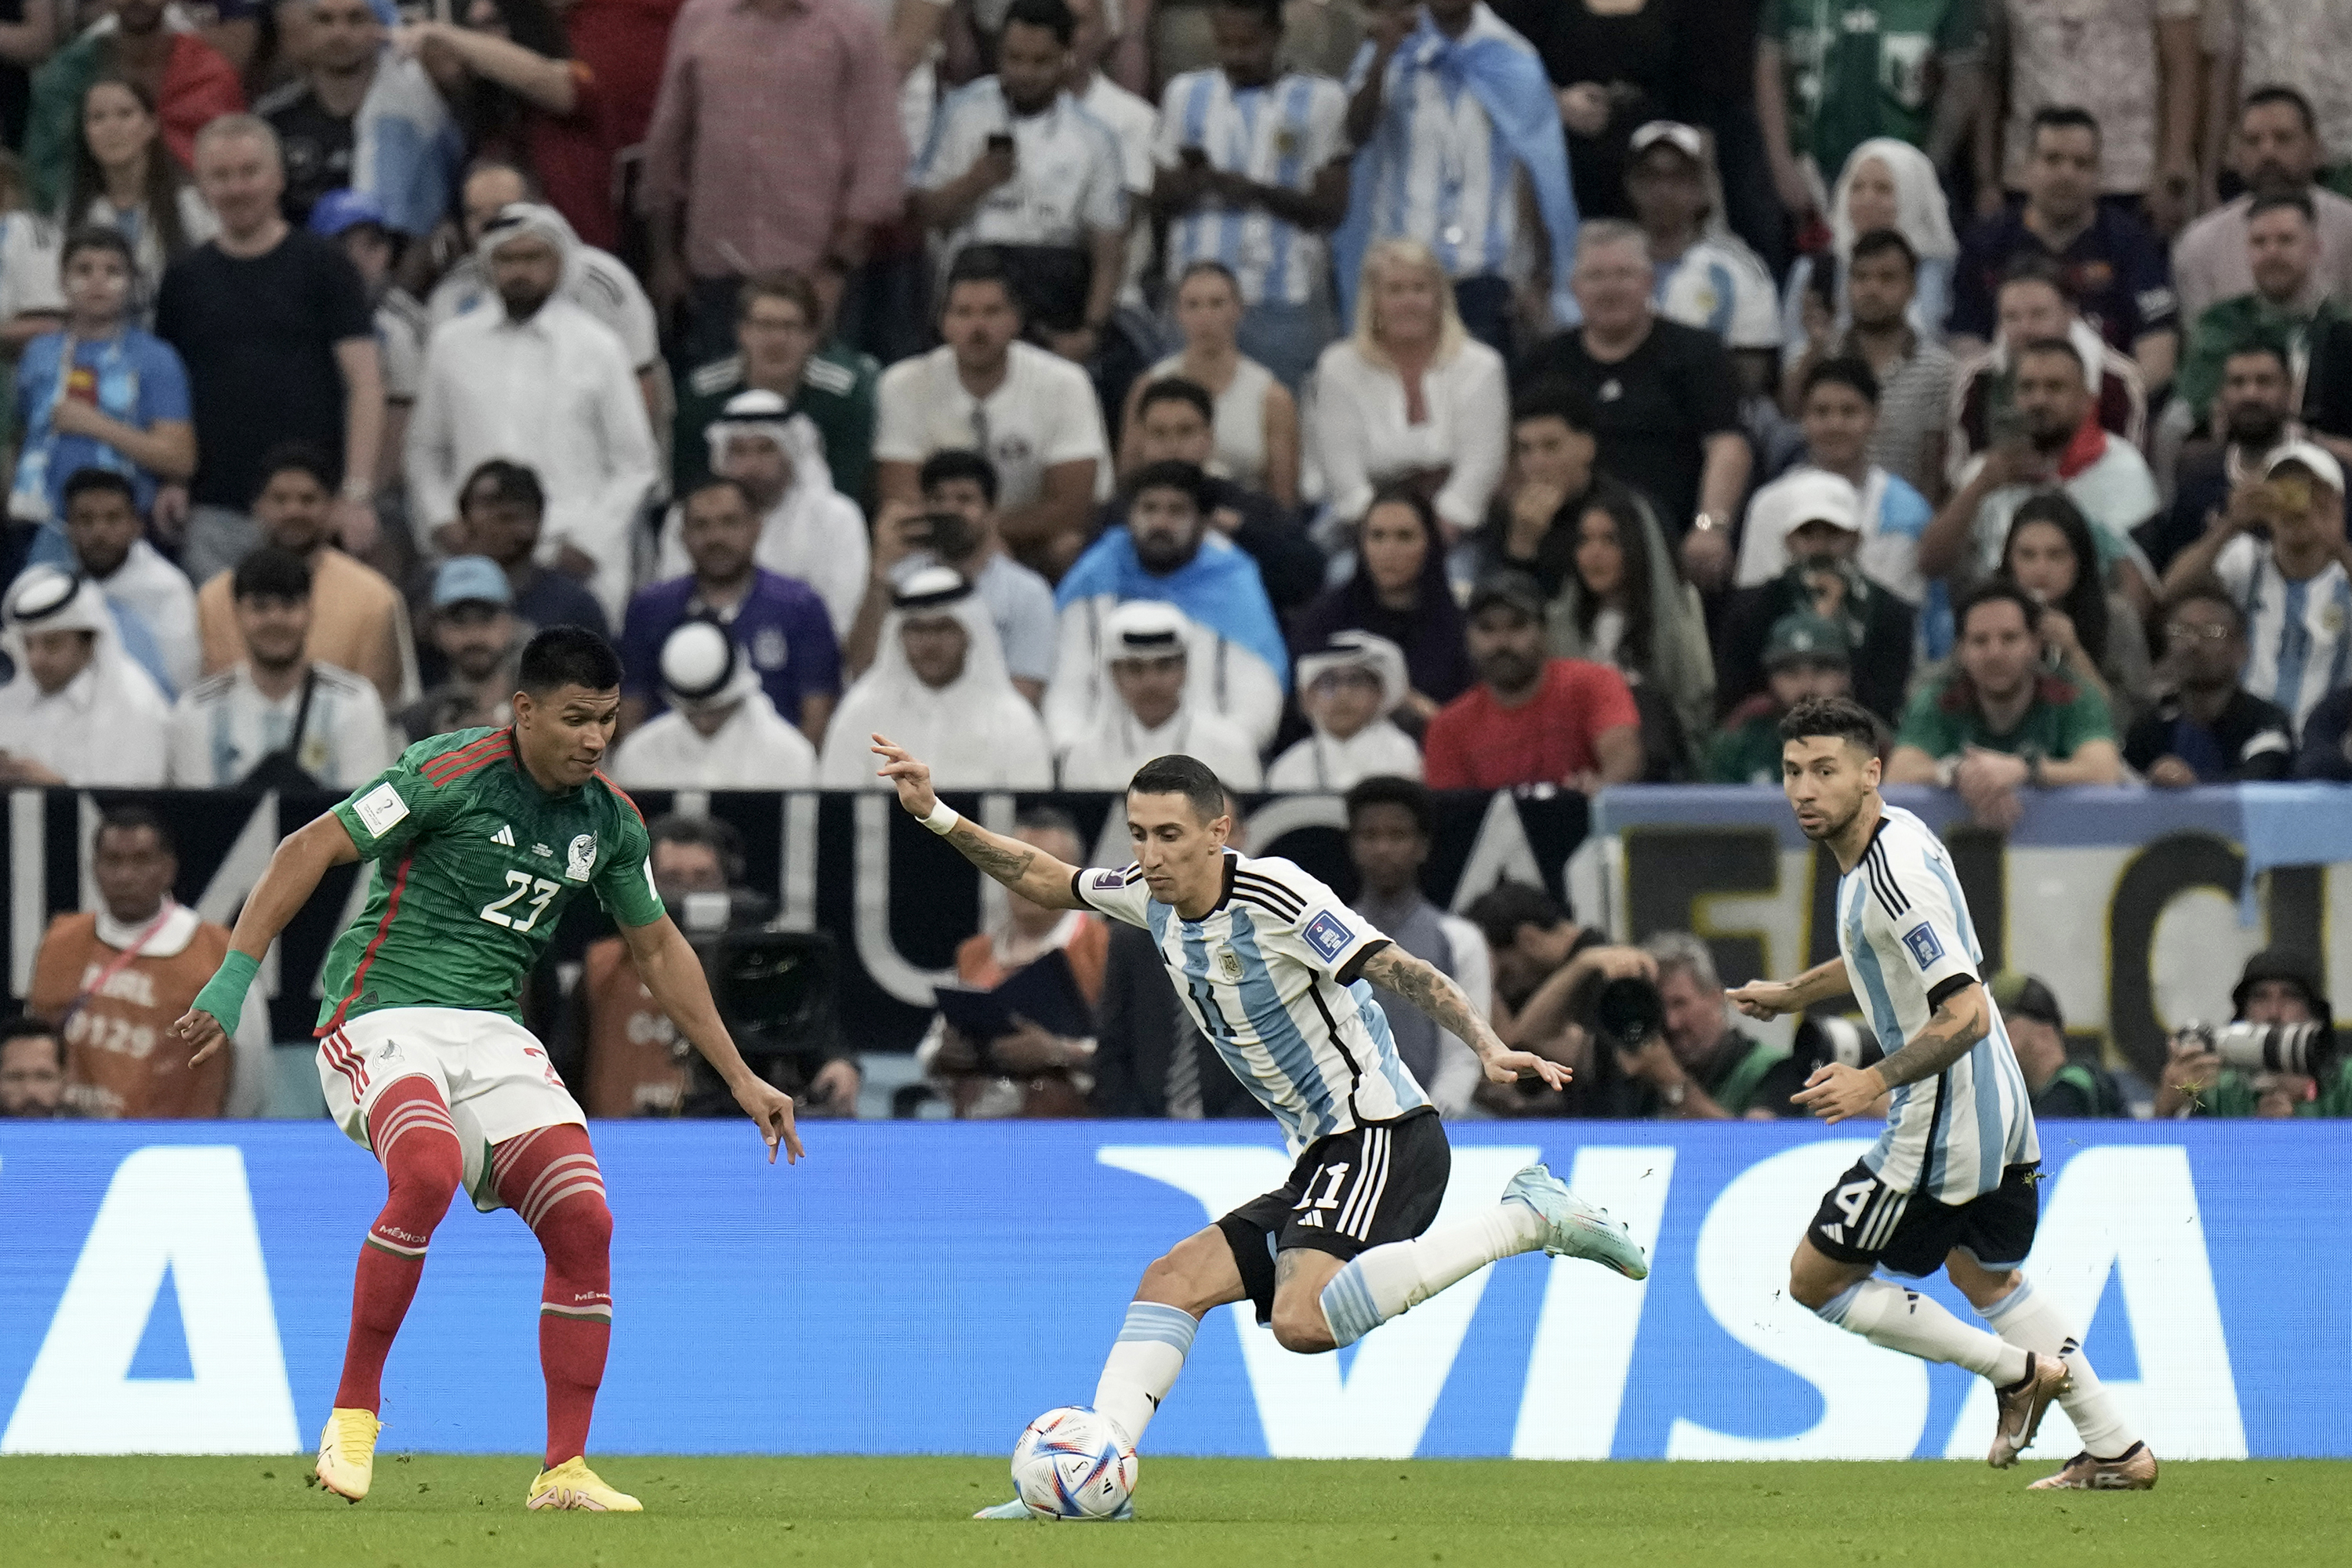 Argentina's Angel Di Maria, center, controls the ball next to Mexico's Jesus Gallardo, left, during the World Cup group C soccer match between Argentina and Mexico, at the Lusail Stadium in Lusail, Qatar, on Saturday.